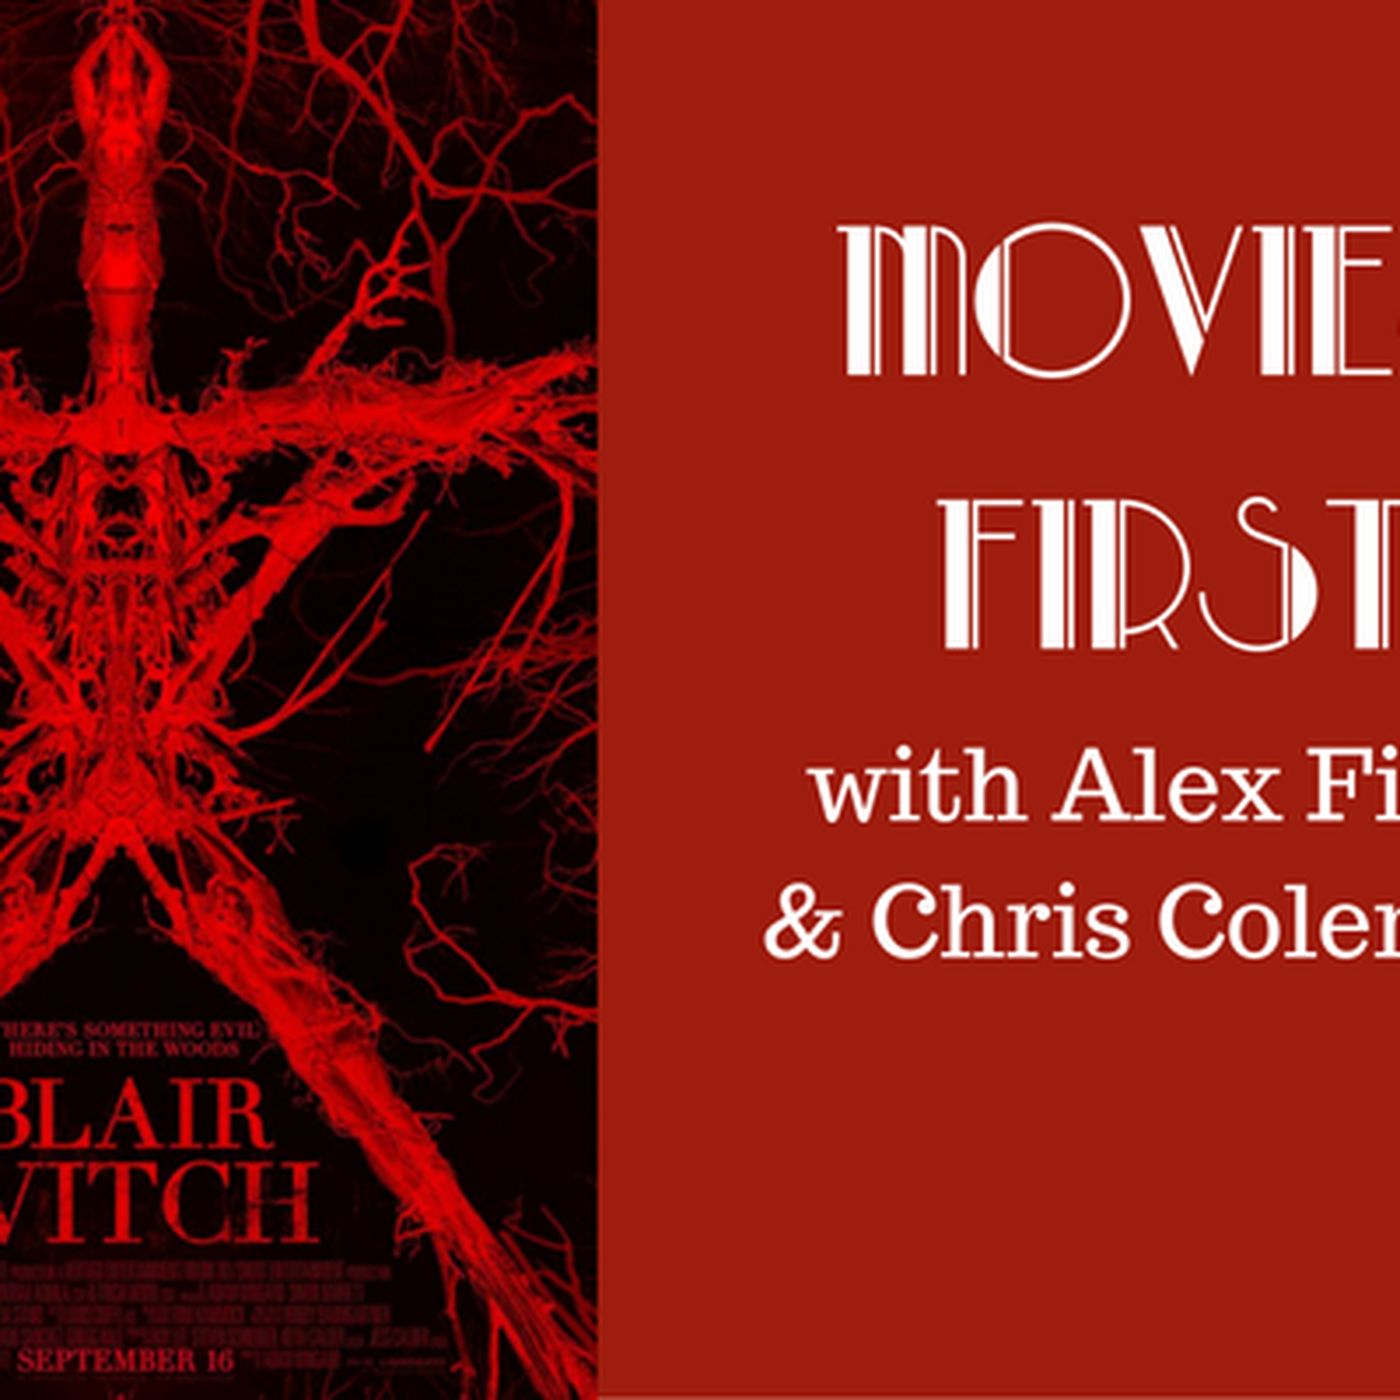 41: Movies First with Alex First & Chris Coleman - Blair Witch (2016)